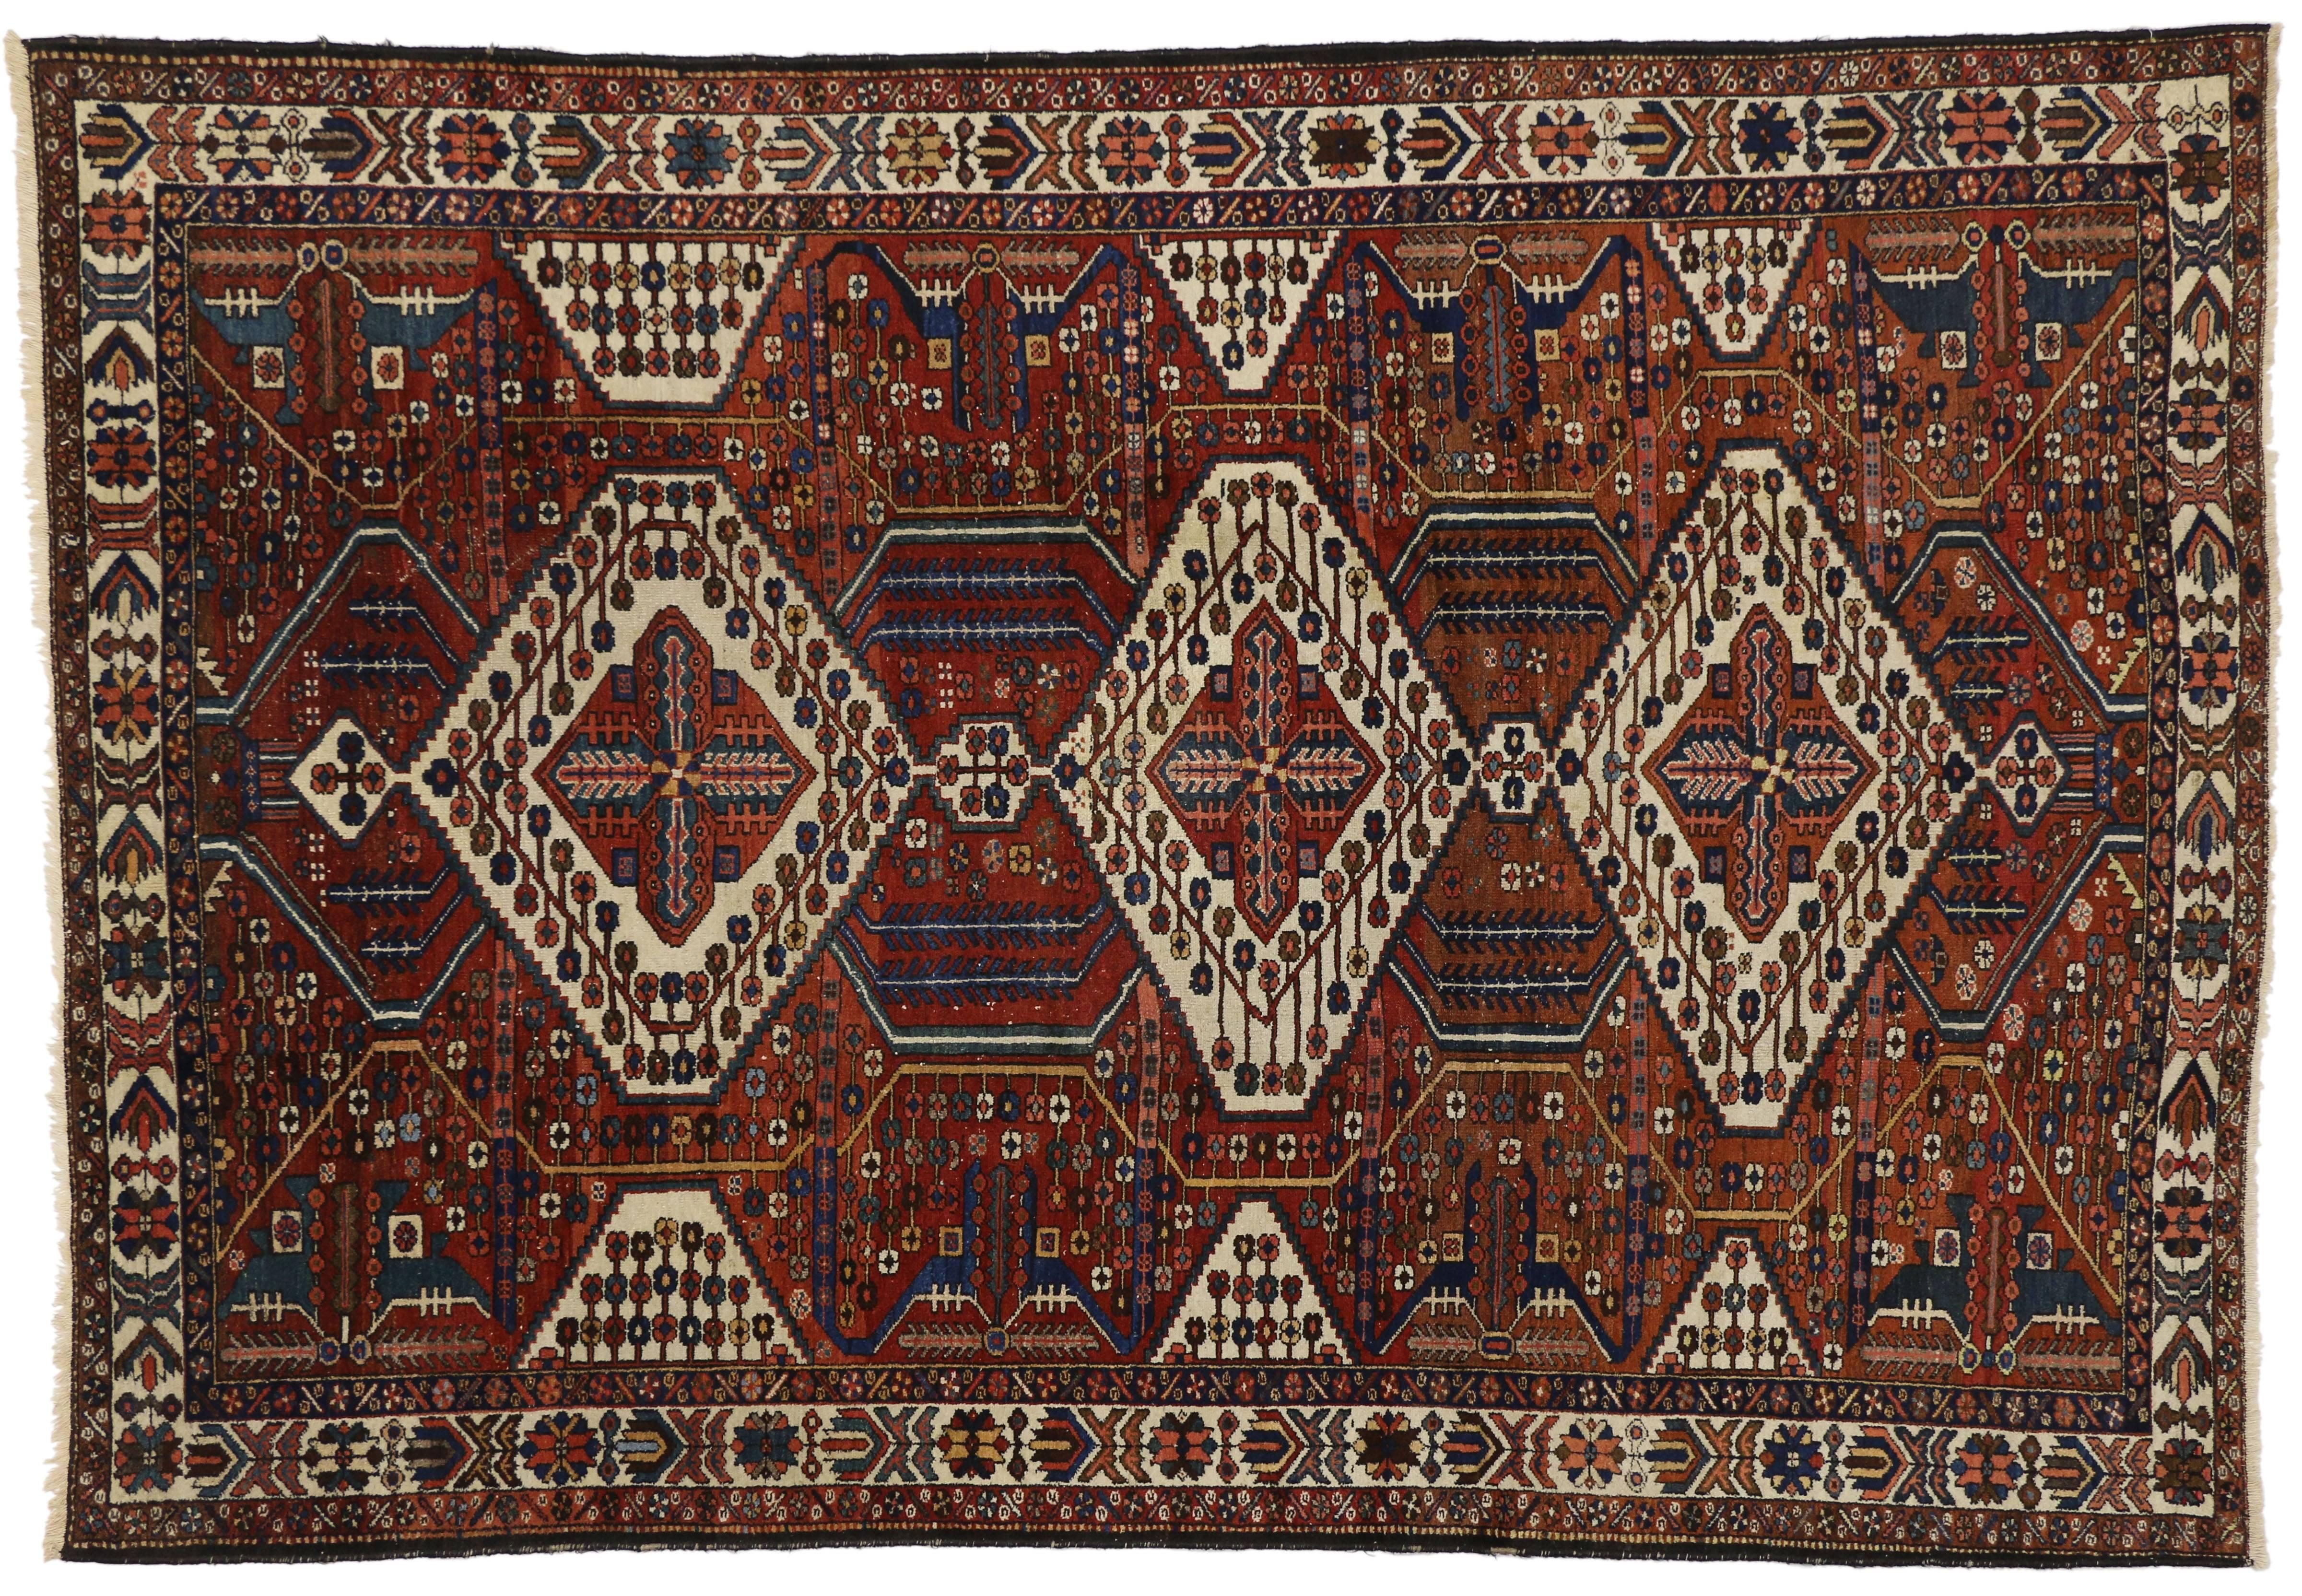 Antique Persian Bakhtiari Rug, Midcentury Modern Meets Tribal Enchantment In Good Condition For Sale In Dallas, TX